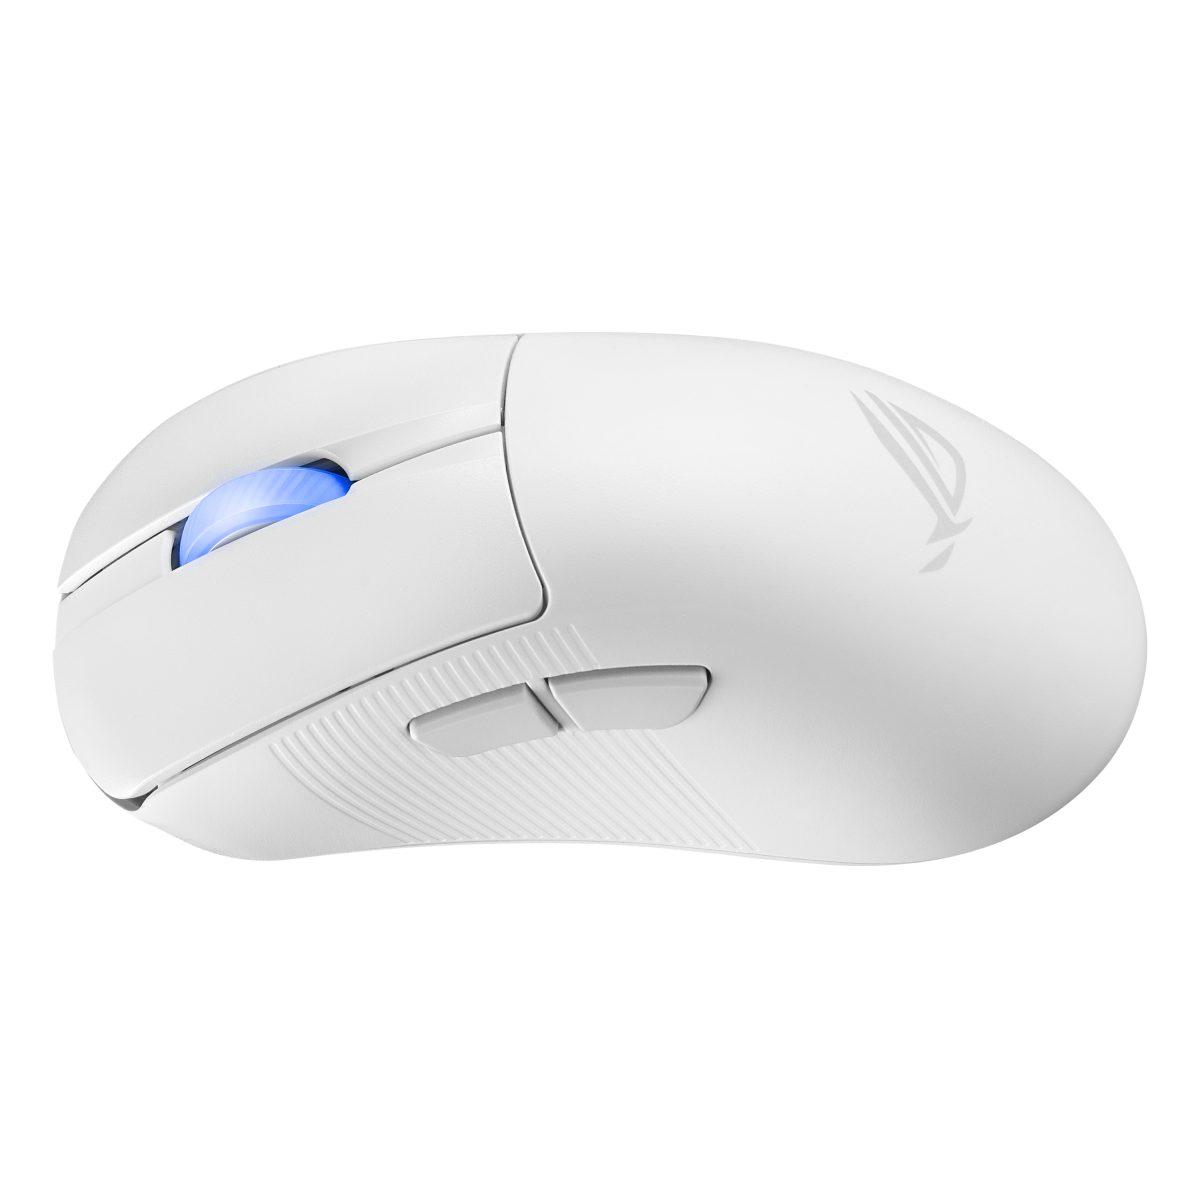 ASUS ROG Keris II Ace Wireless AimPoint White Gaming Maus thumbnail 3